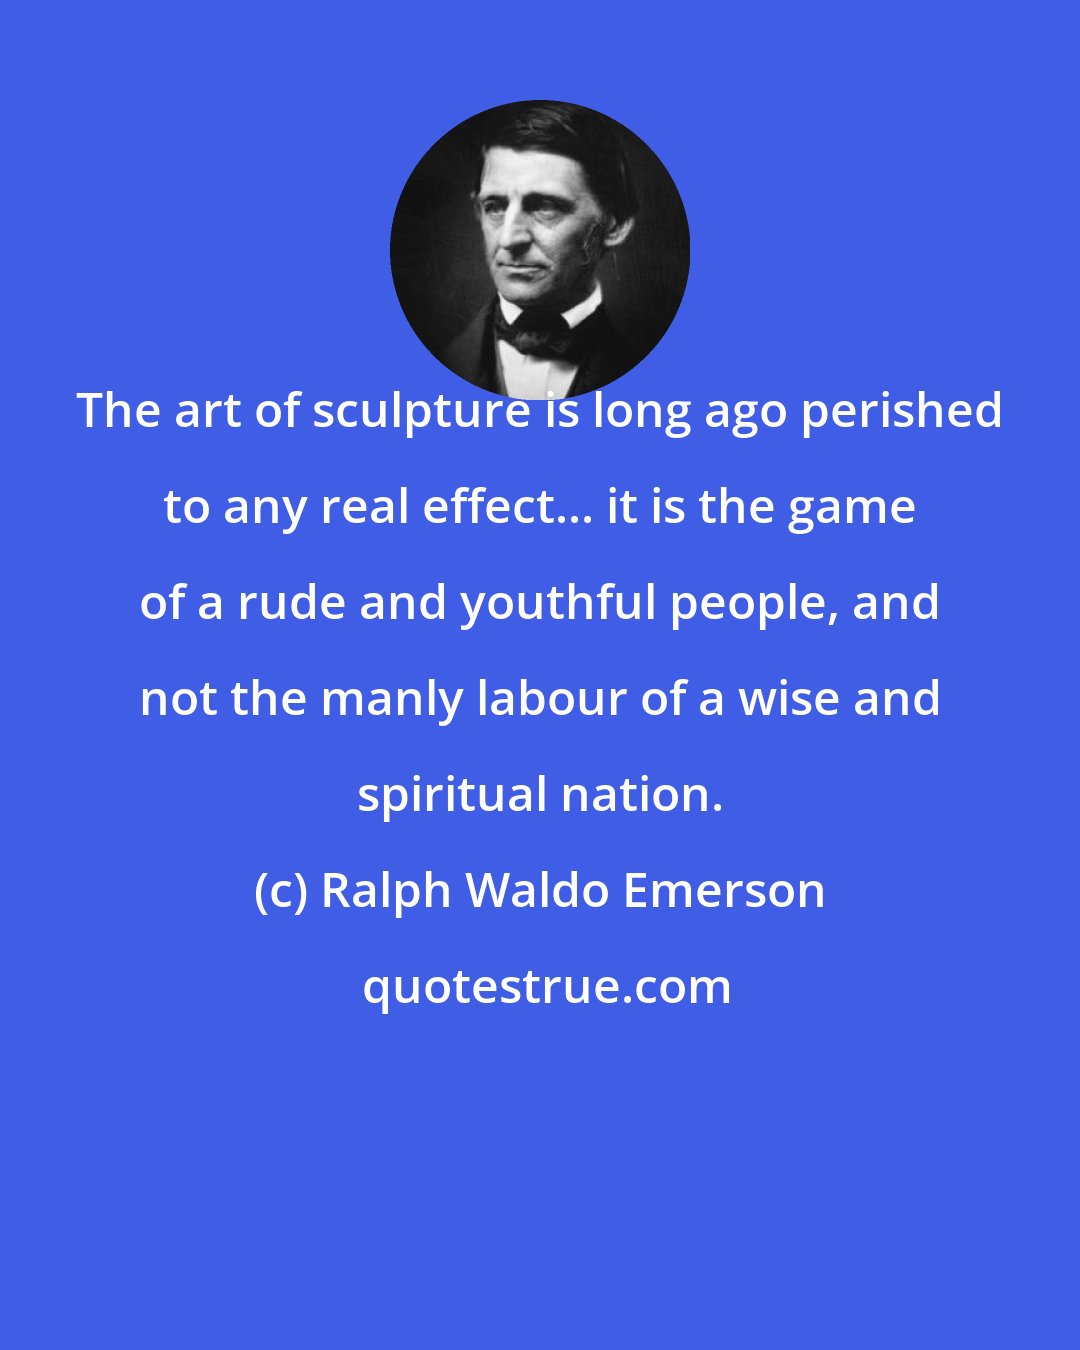 Ralph Waldo Emerson: The art of sculpture is long ago perished to any real effect... it is the game of a rude and youthful people, and not the manly labour of a wise and spiritual nation.